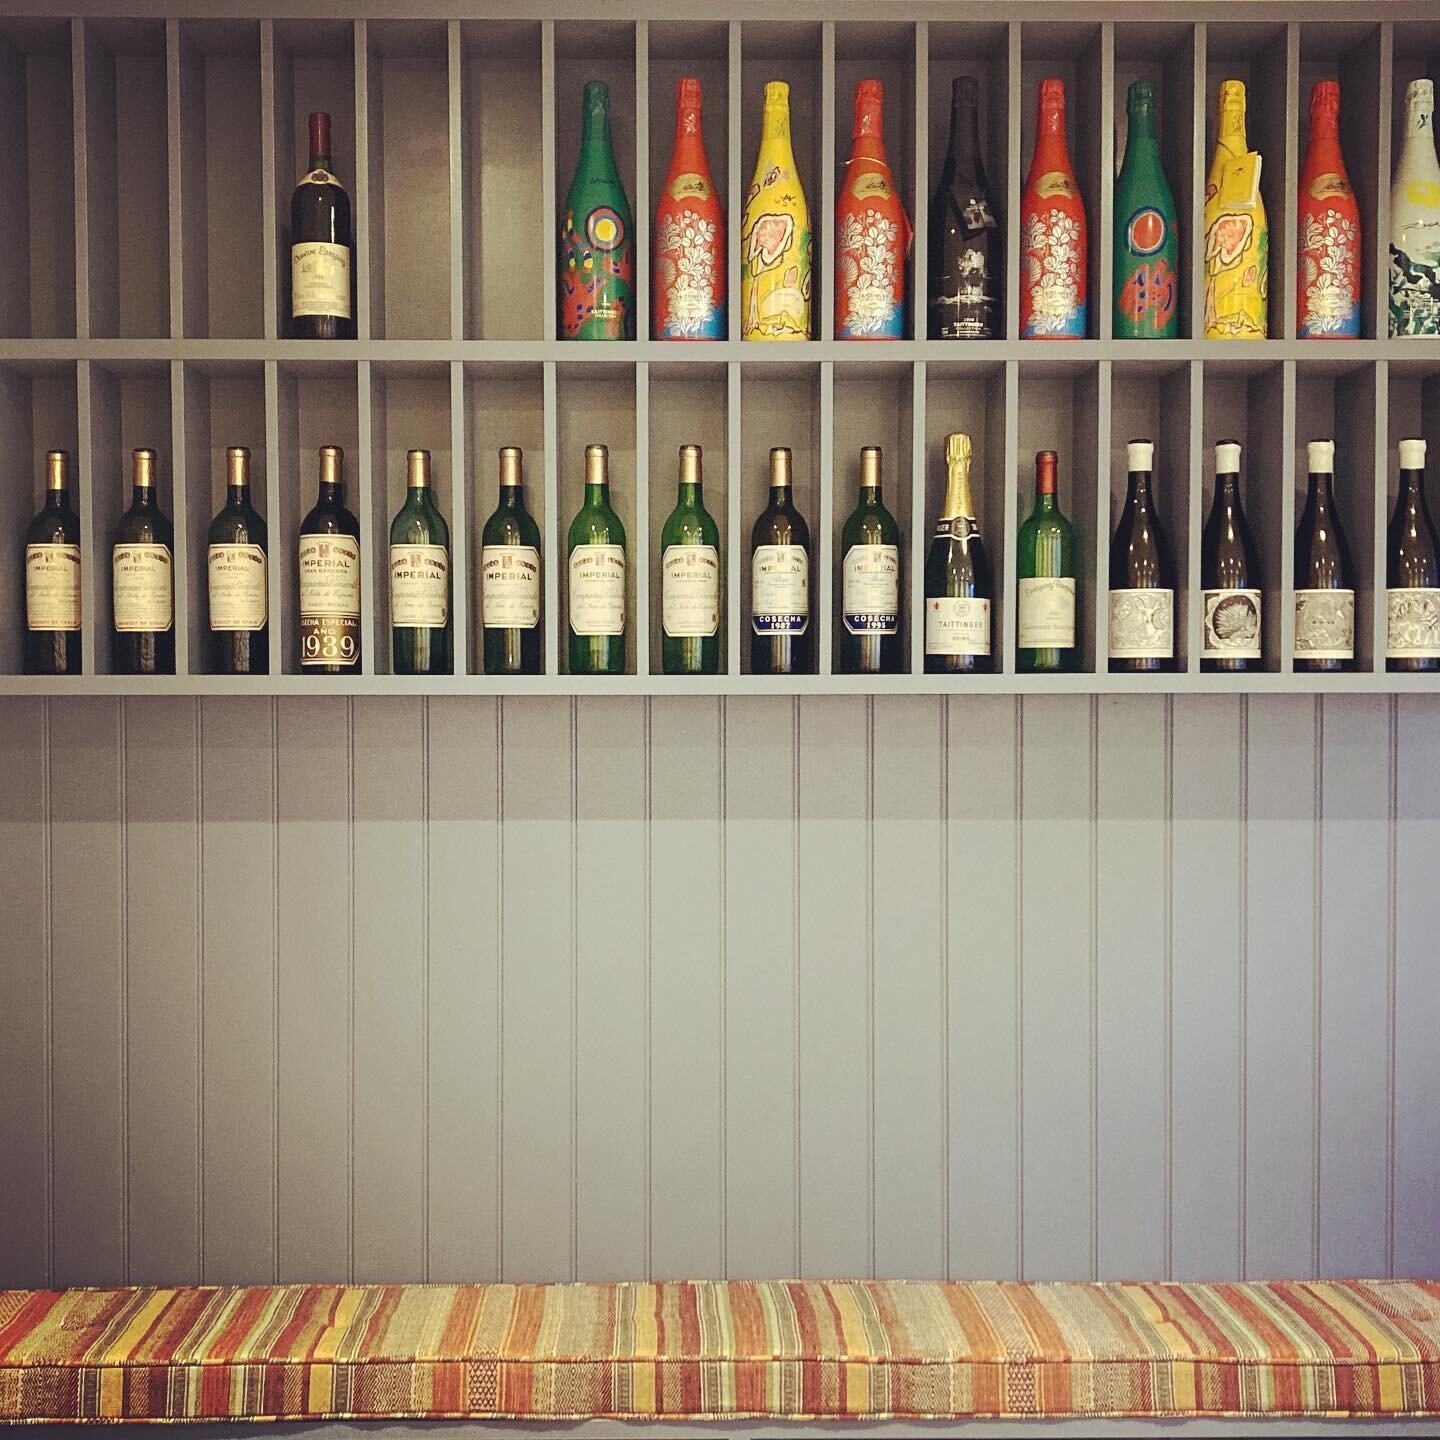 Thirsty work at Hatch Mansfield Ltd!
#autometry_ltd #cabinetry #winestore #refurbishment #officefitout